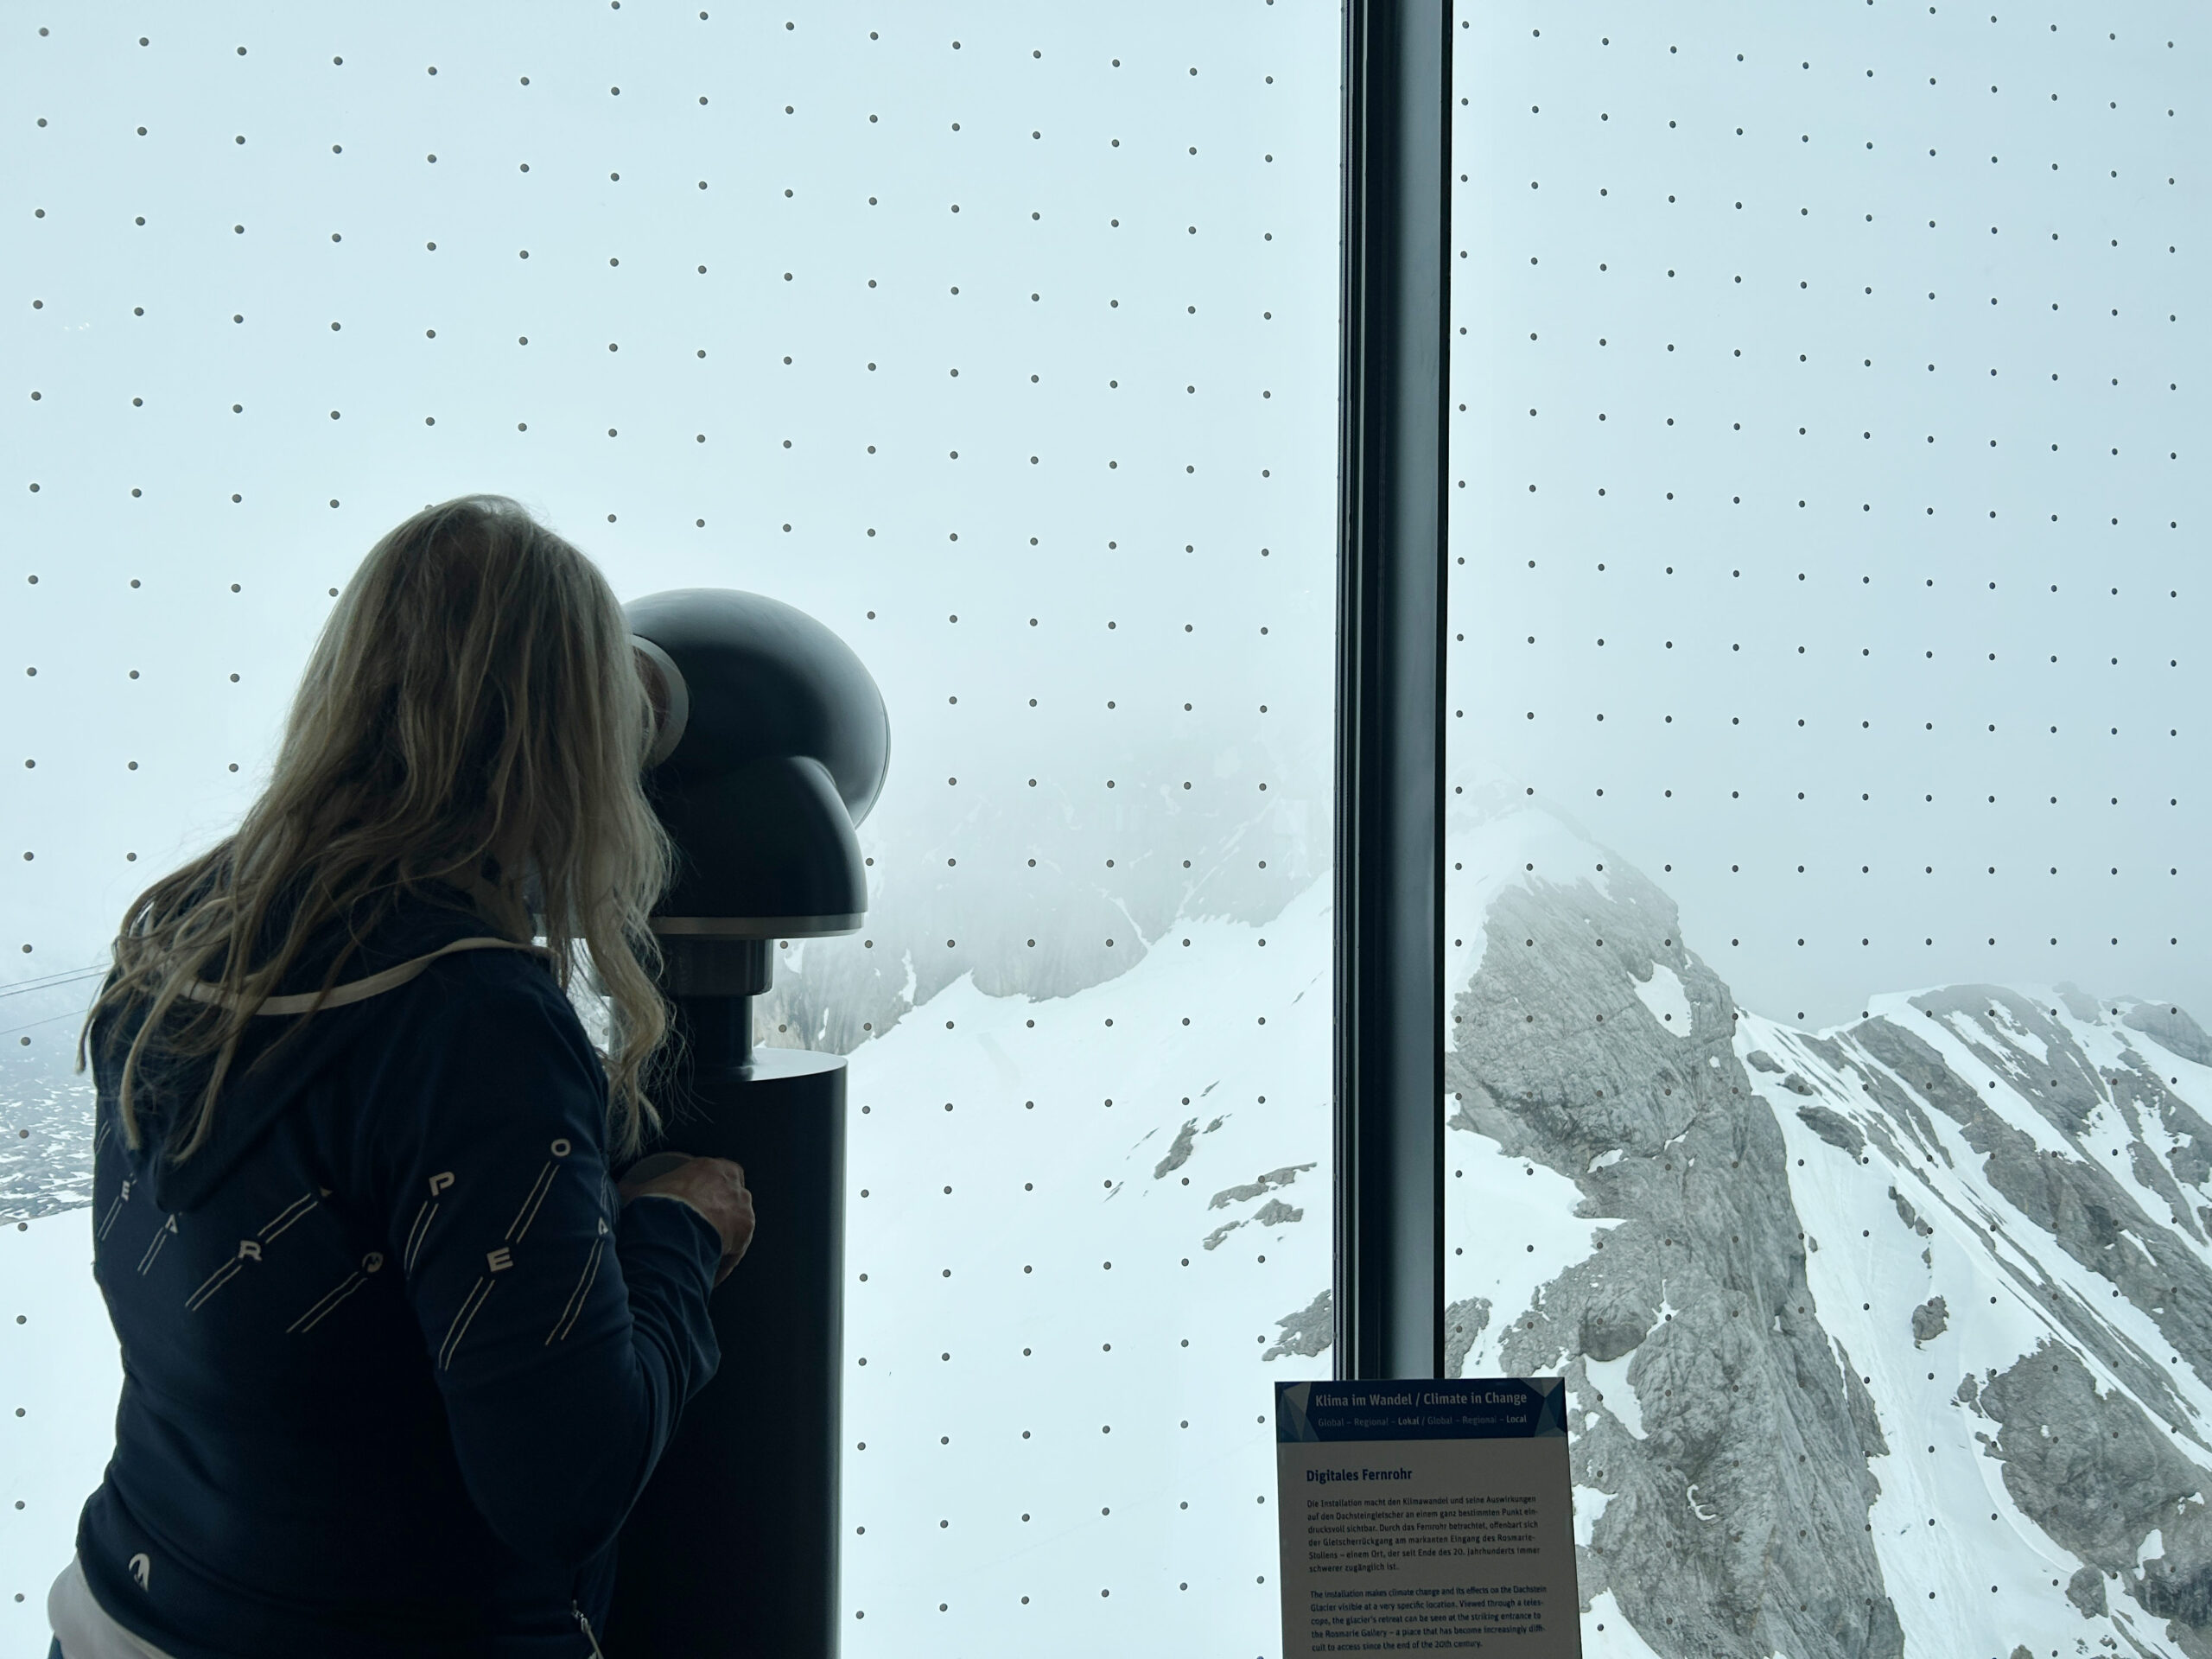 Ars Electronica Solutions equips new visitor center of the Dachstein Glacier with installations